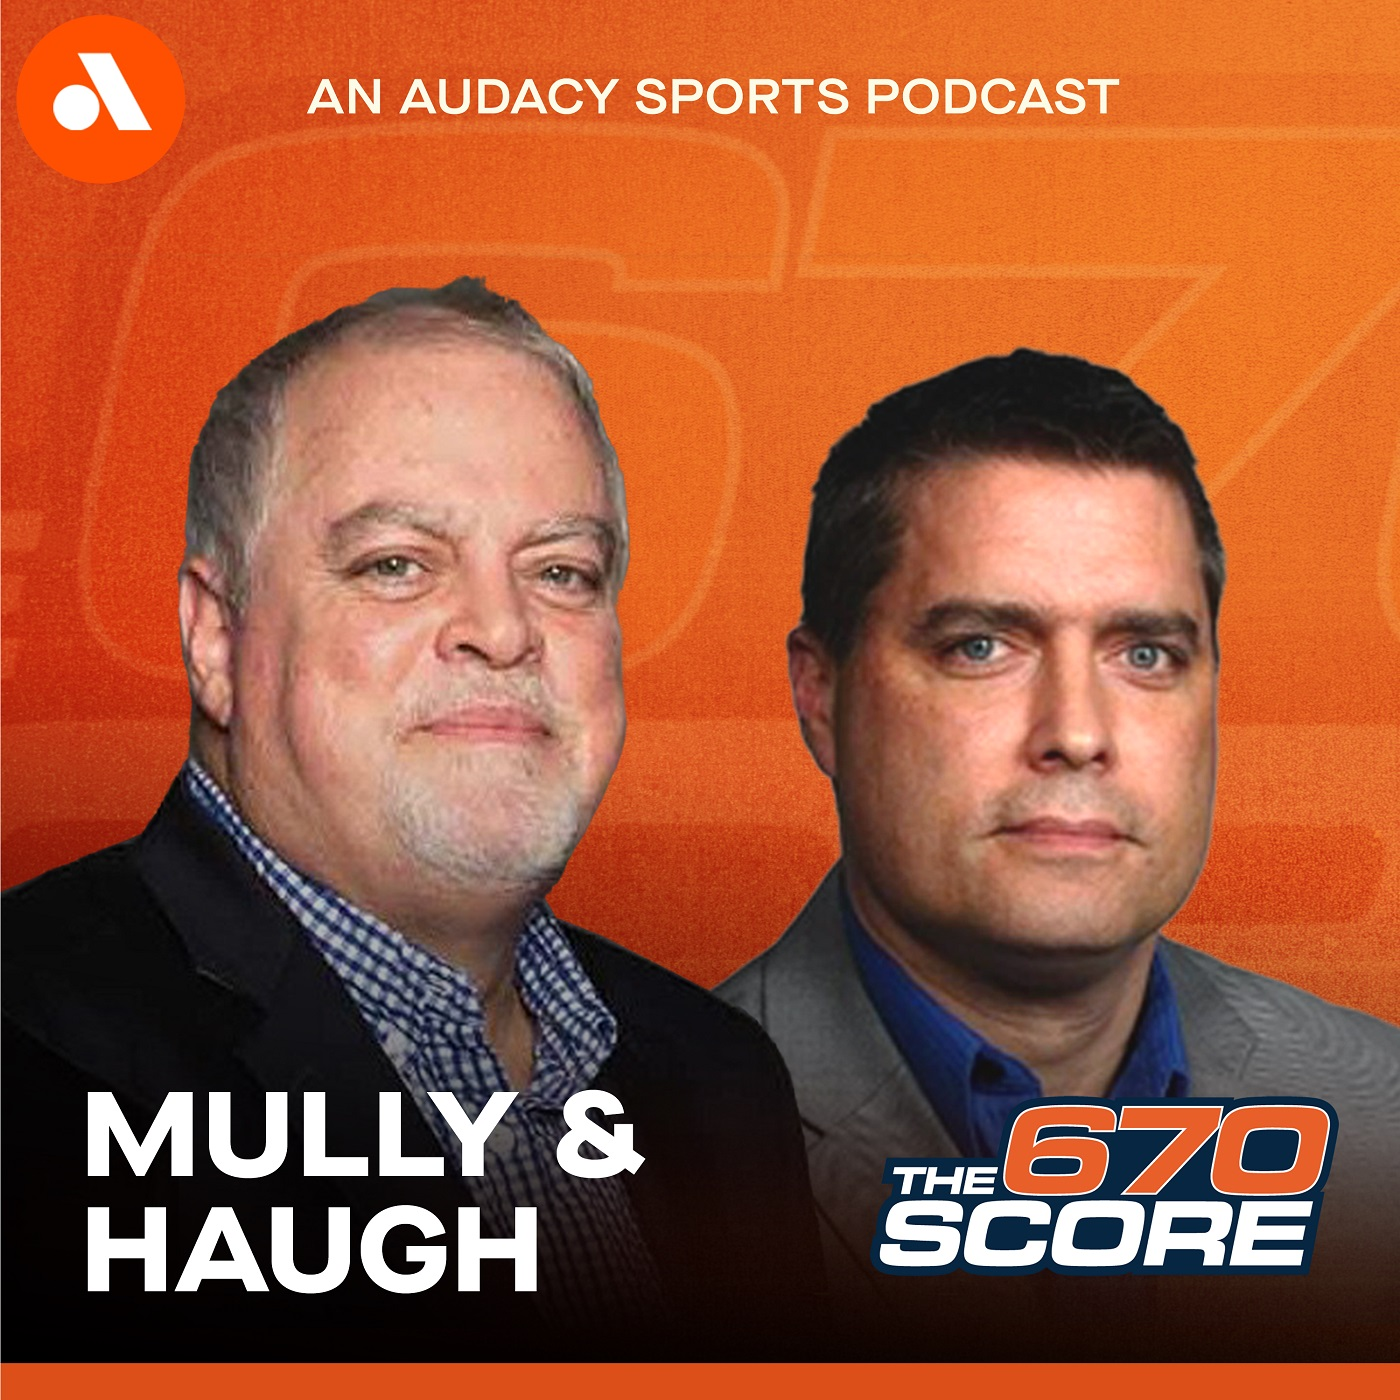 Mully & Haugh: Listeners react to Cubs' roster decisions, Gordon Wittenmyer interview (Hour 3)